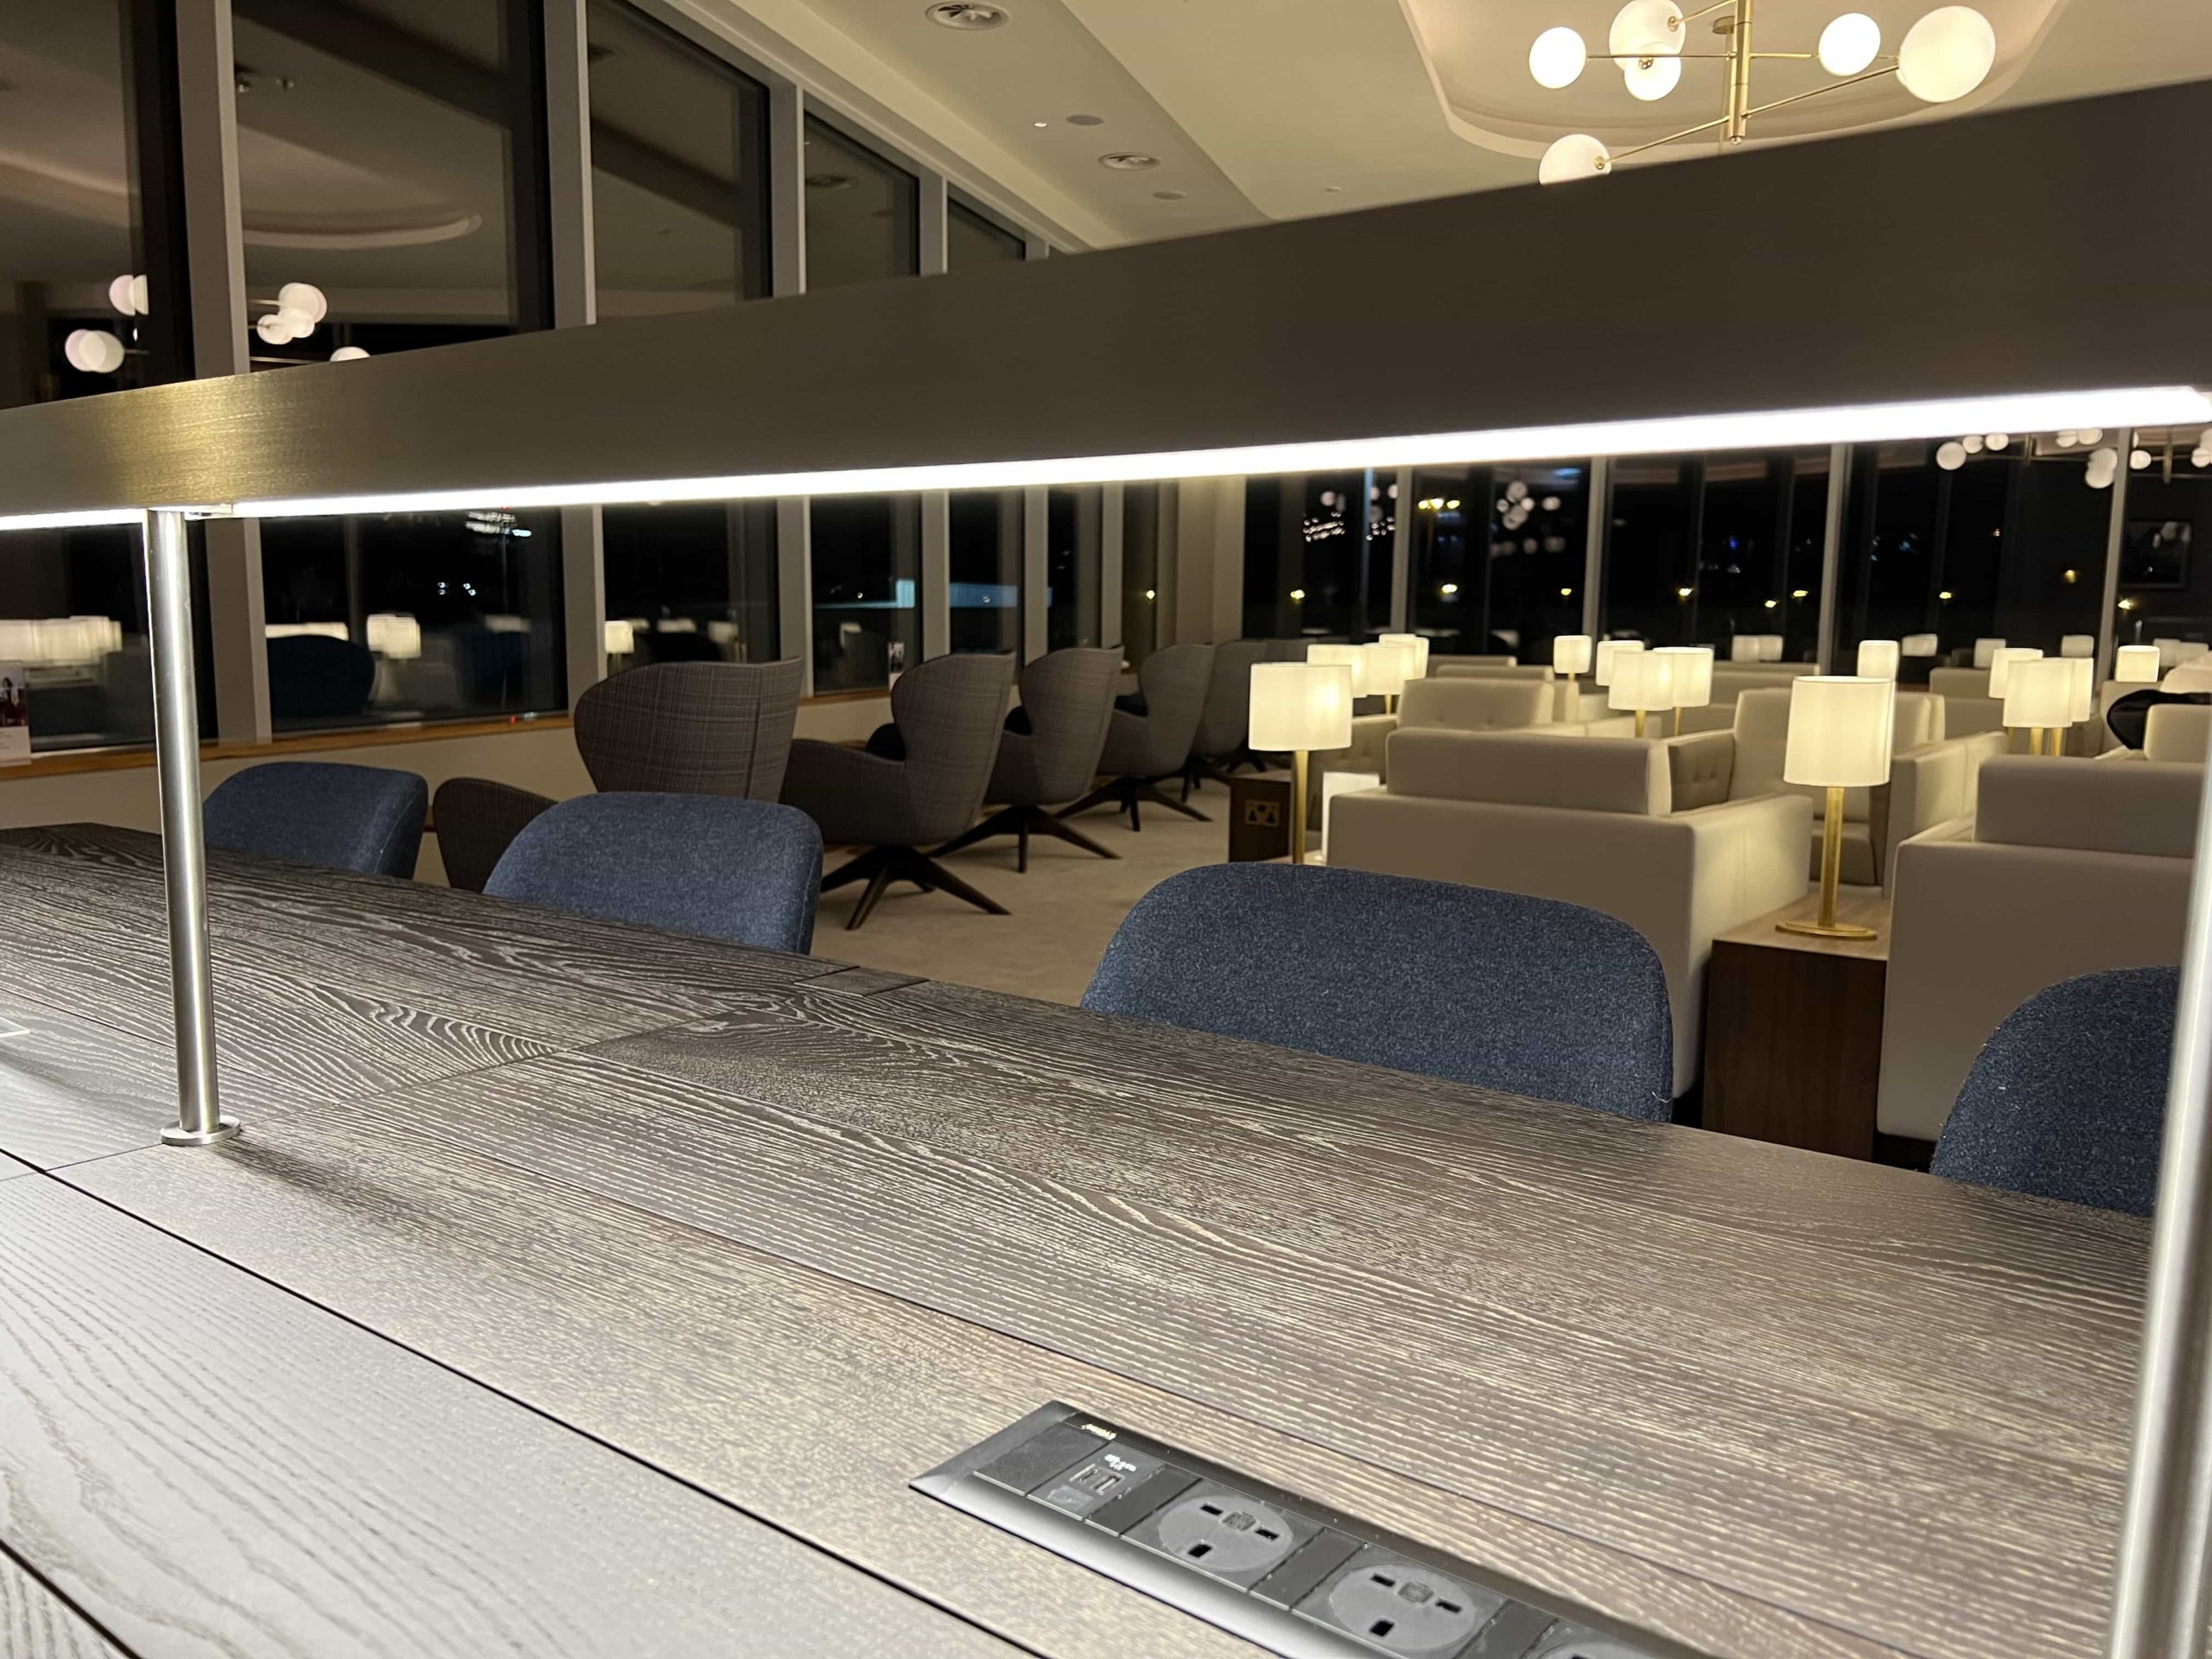 A workstation area illuminated by integrated strip lighting, situated in the corner of an airport lounge